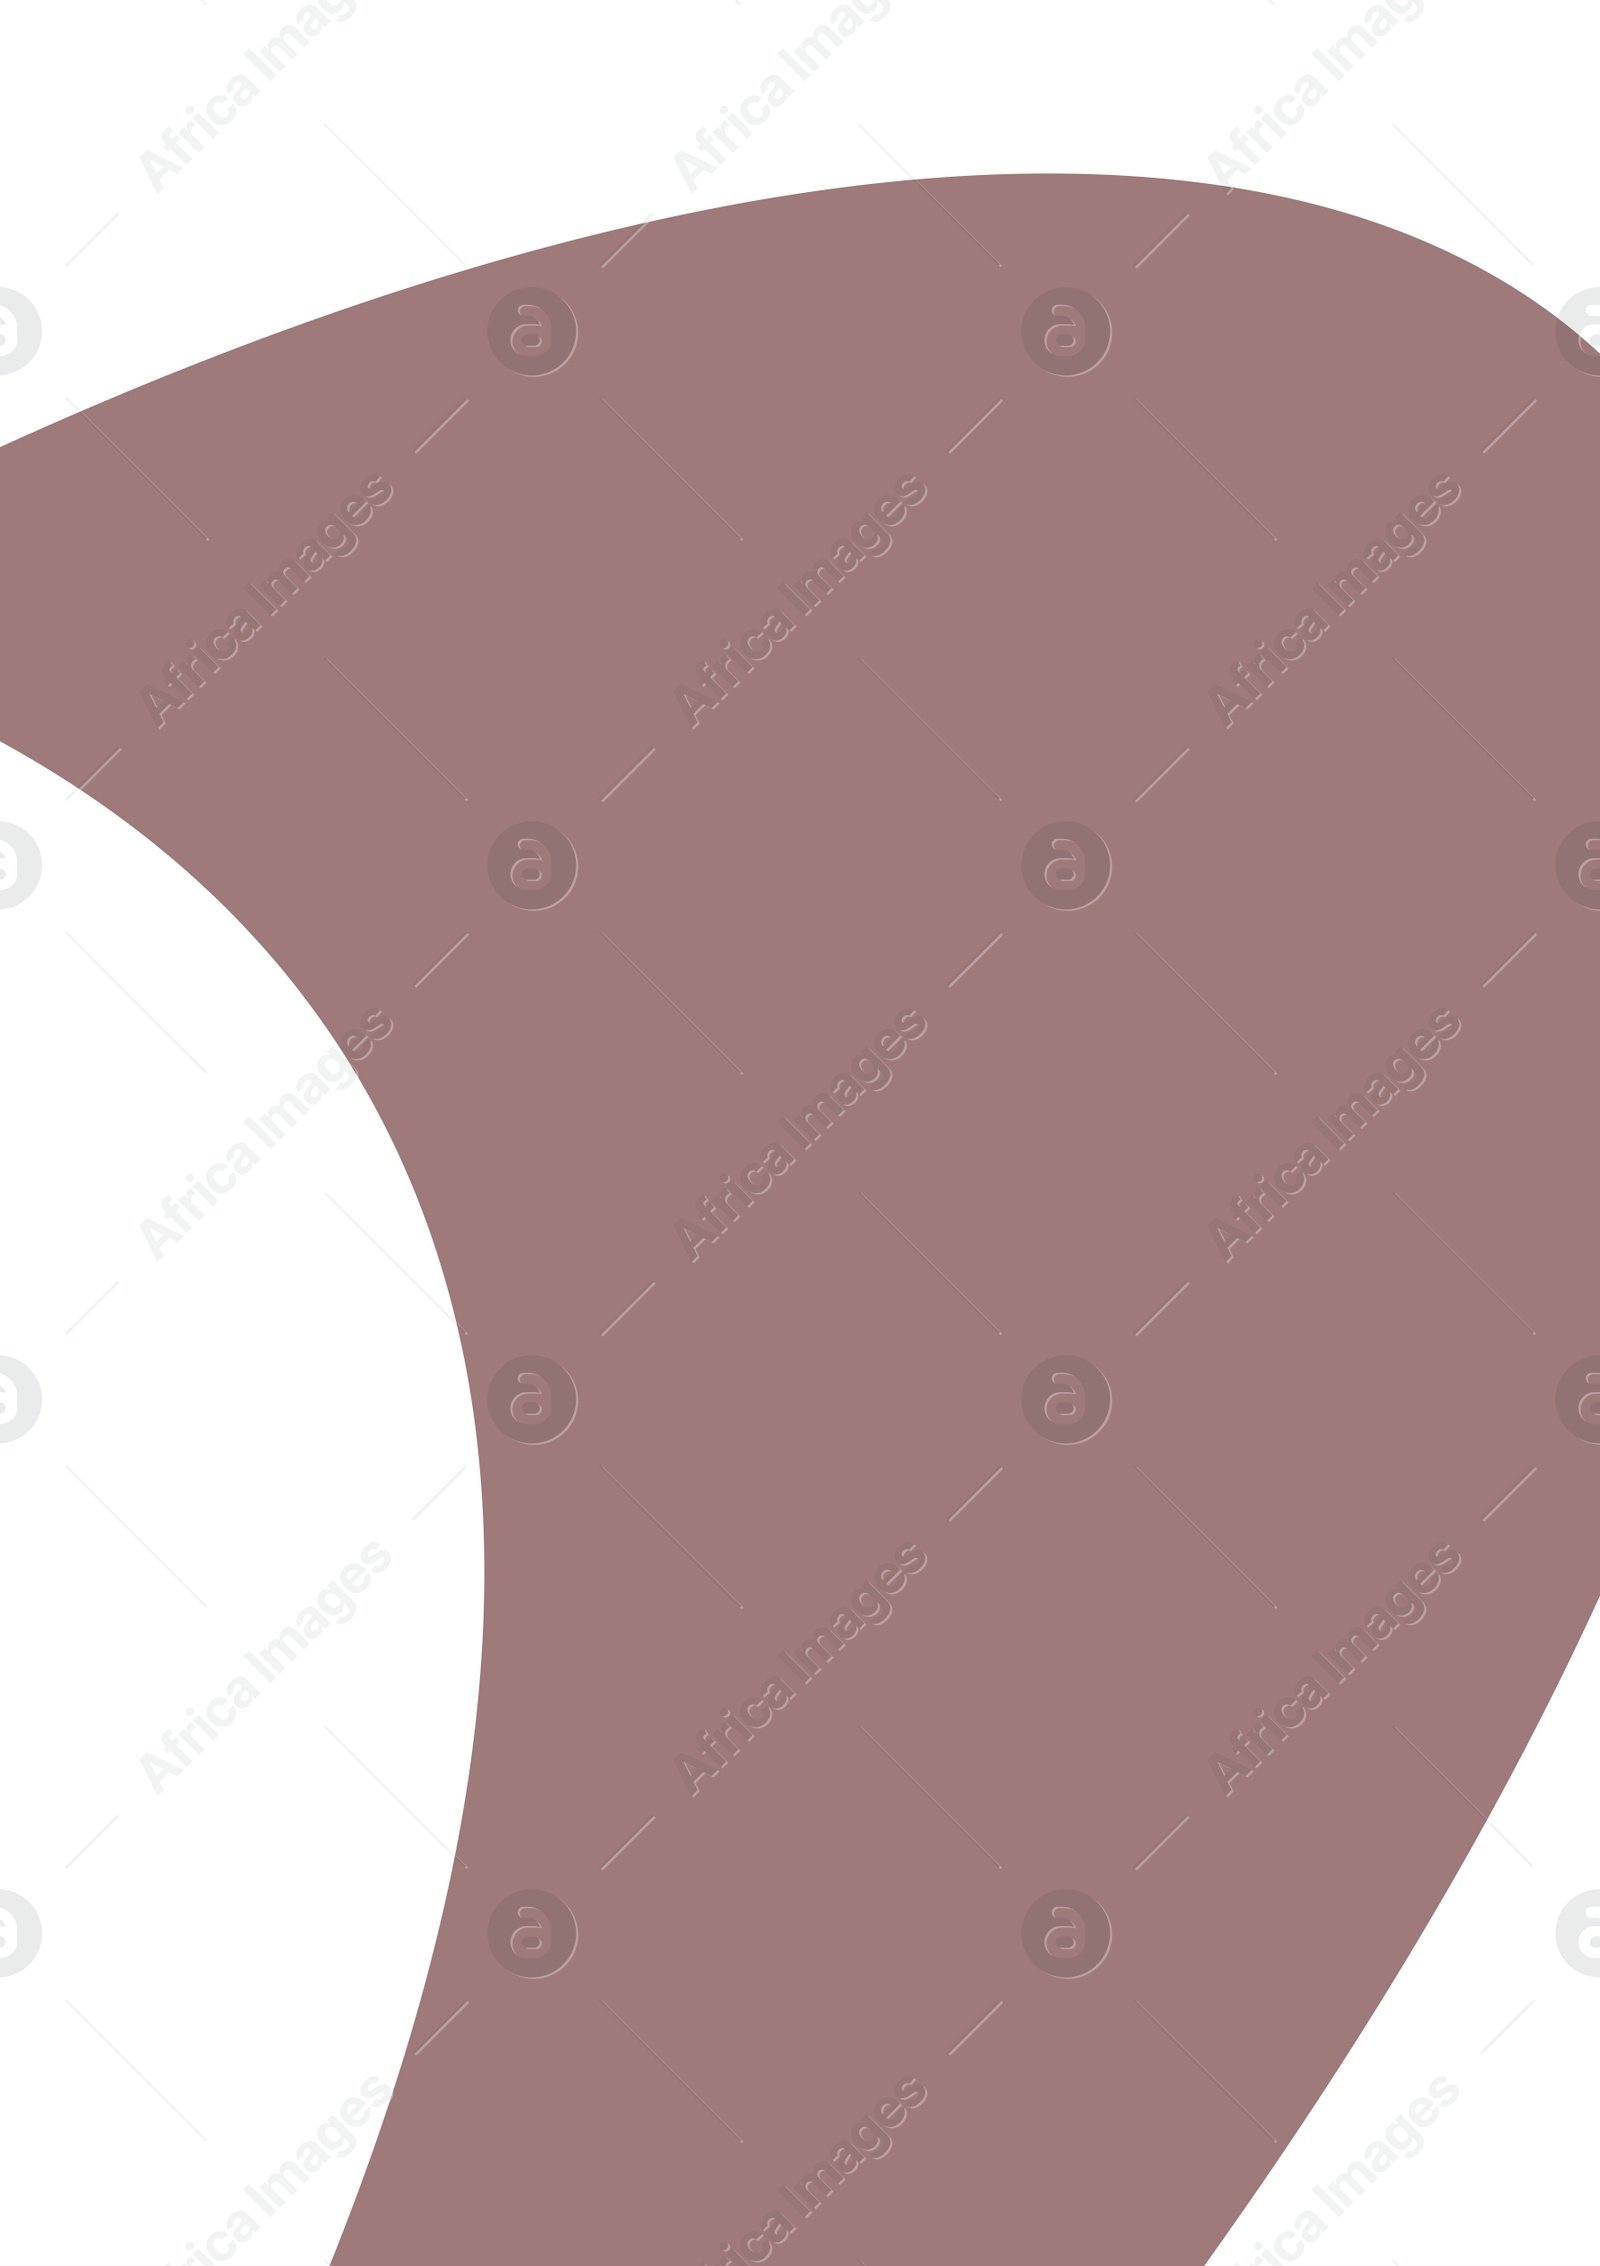 Illustration of Beautiful image with abstract shape in shade of brown color